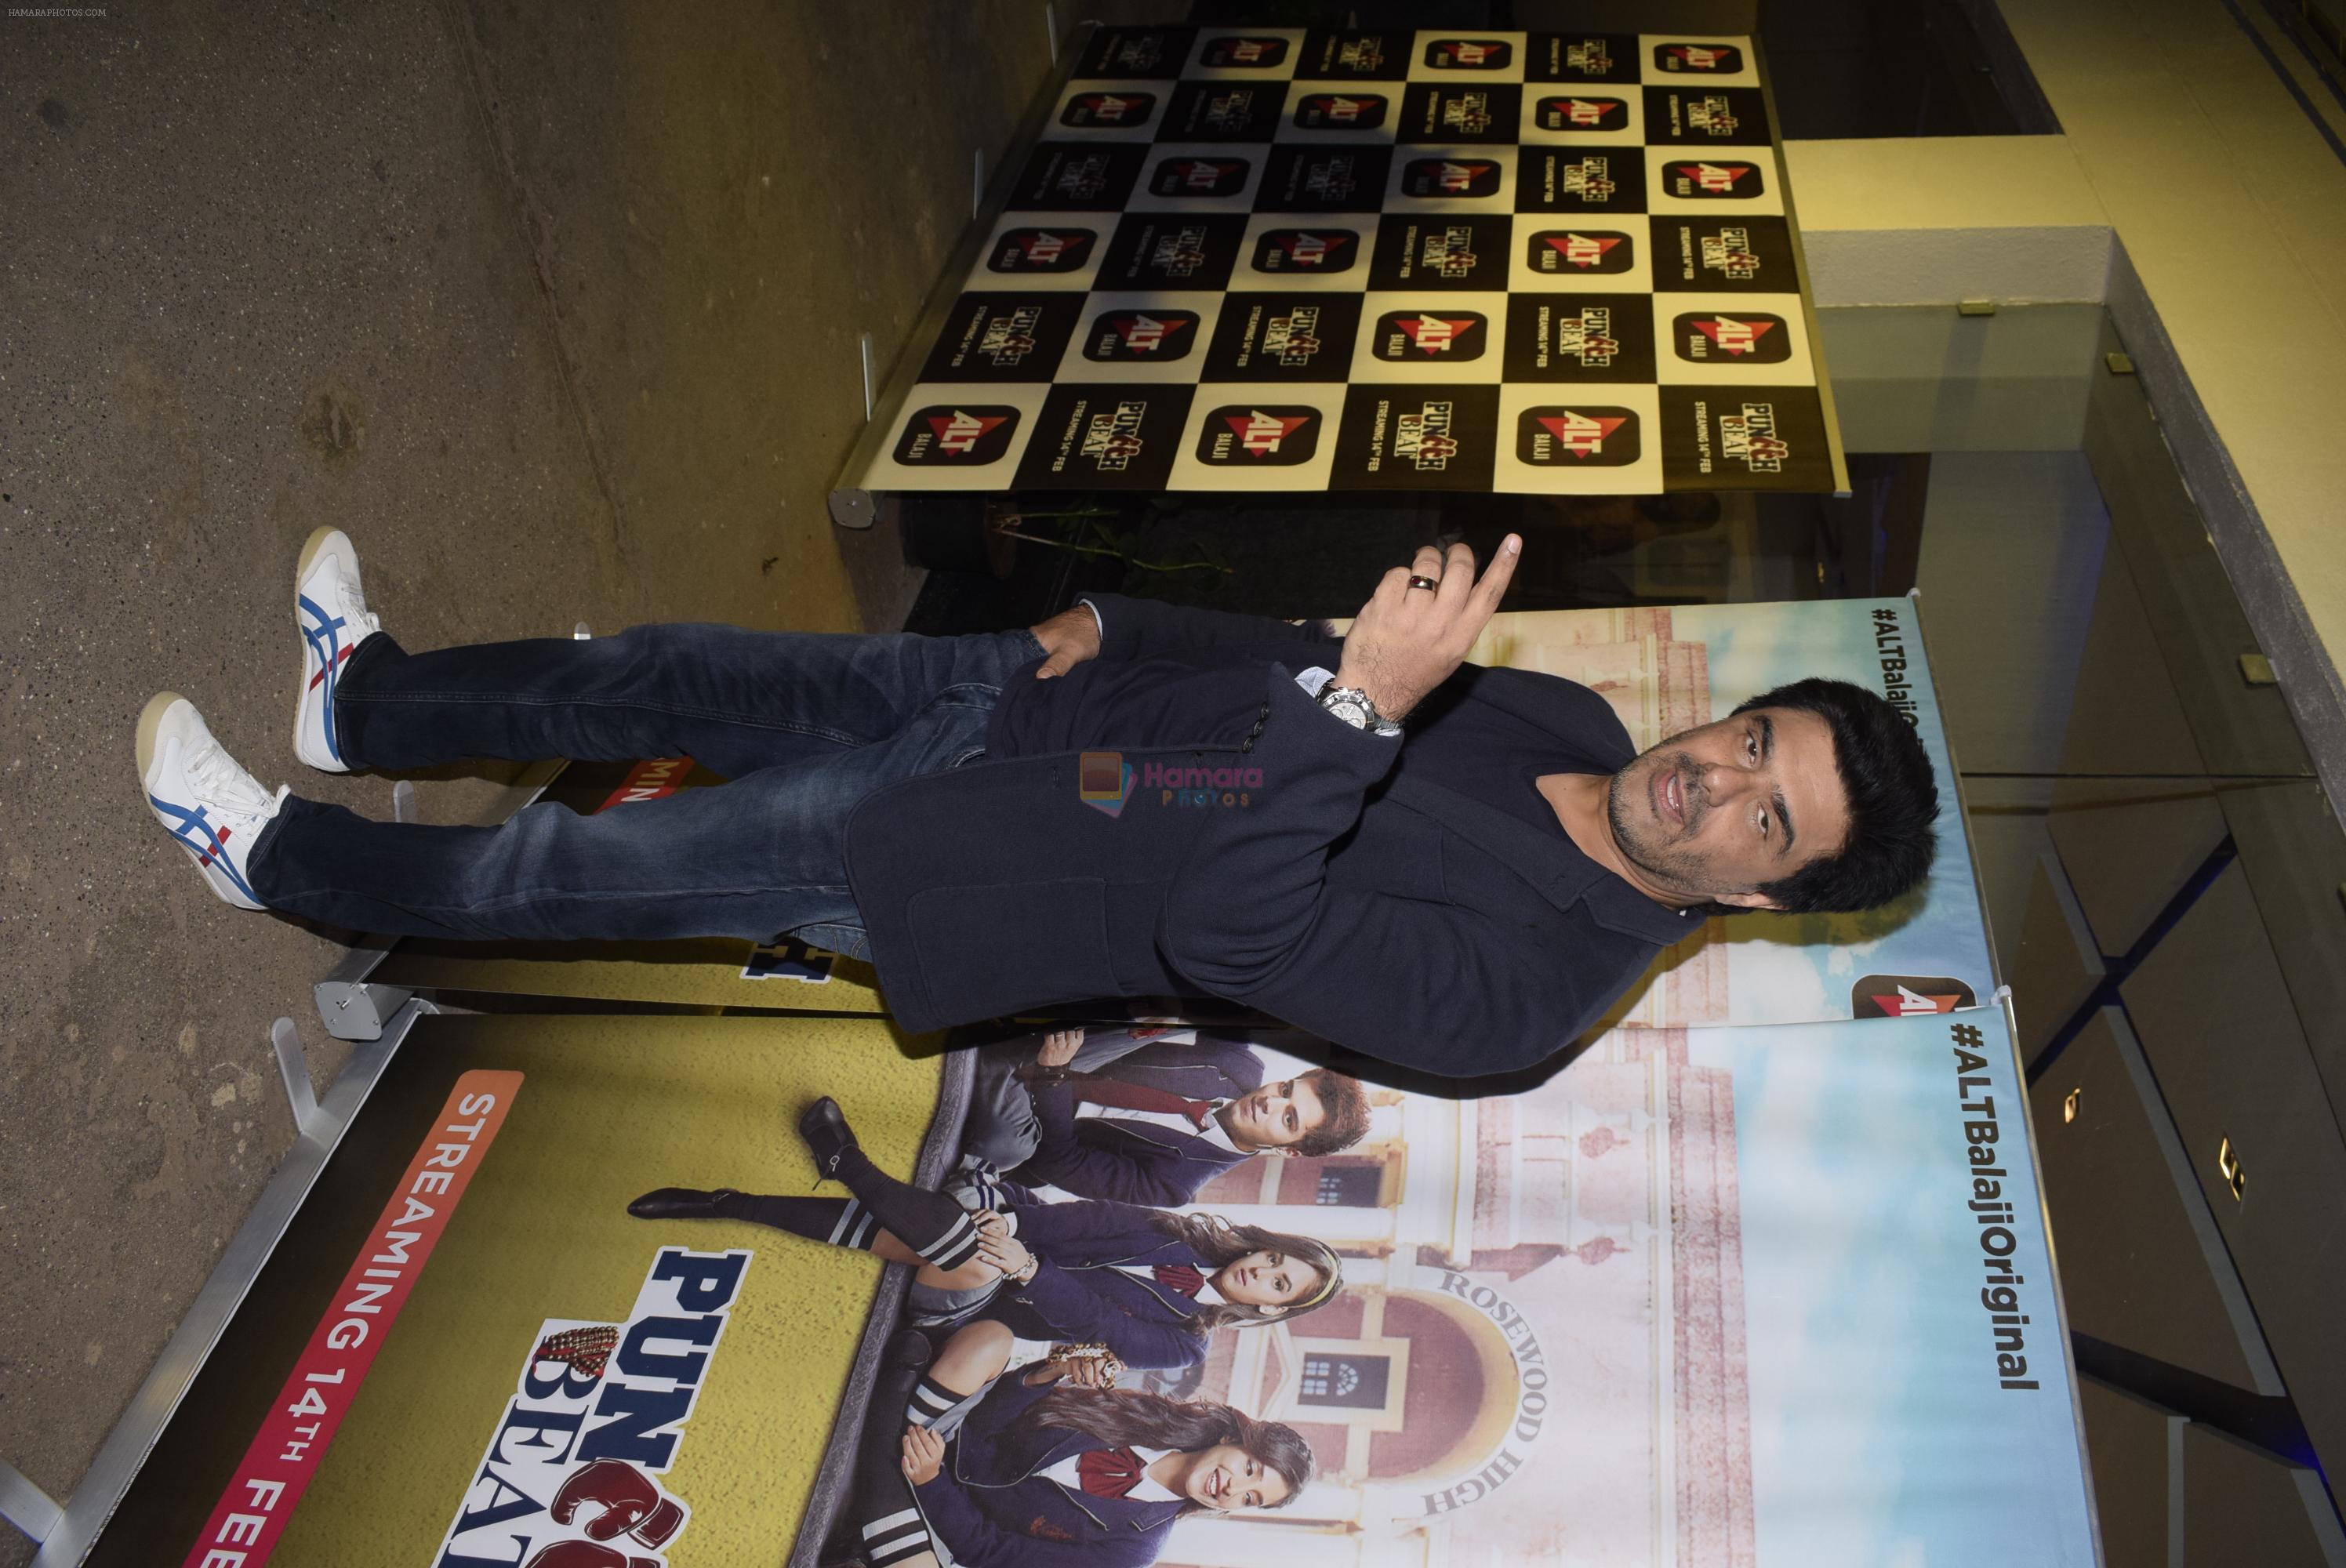 Sameer Soni at the Screening of Alt Balaji's new web series Punch Beat in Sunny sound juhu on 11th Feb 2019